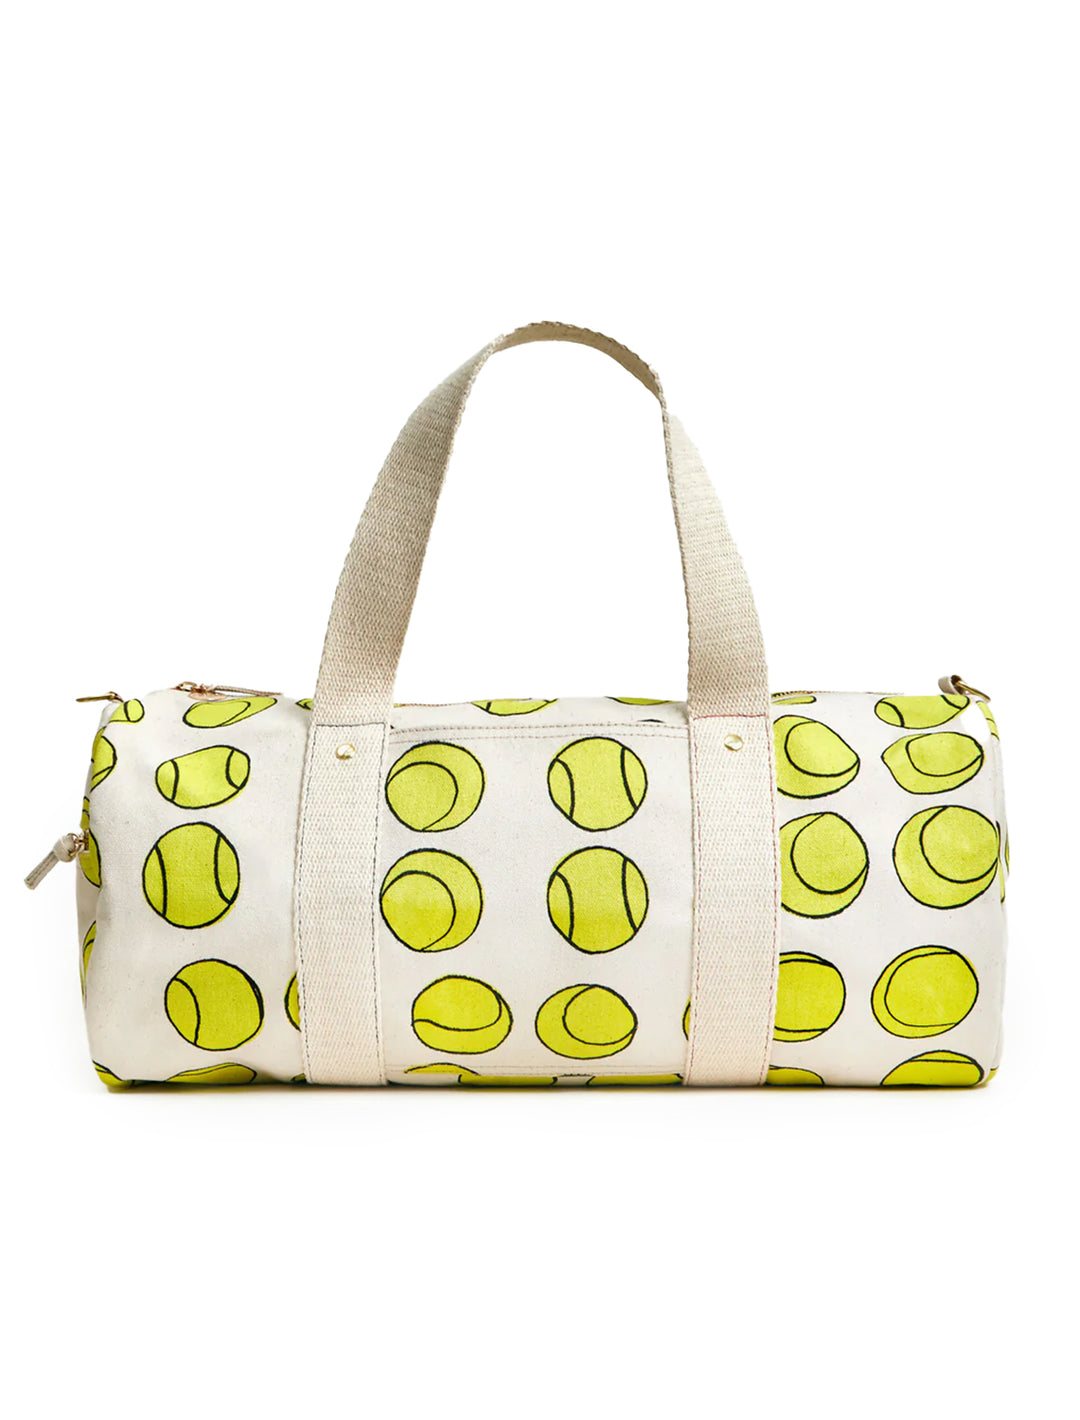 Front view of Clare V.'s tennis balls duffle bag.